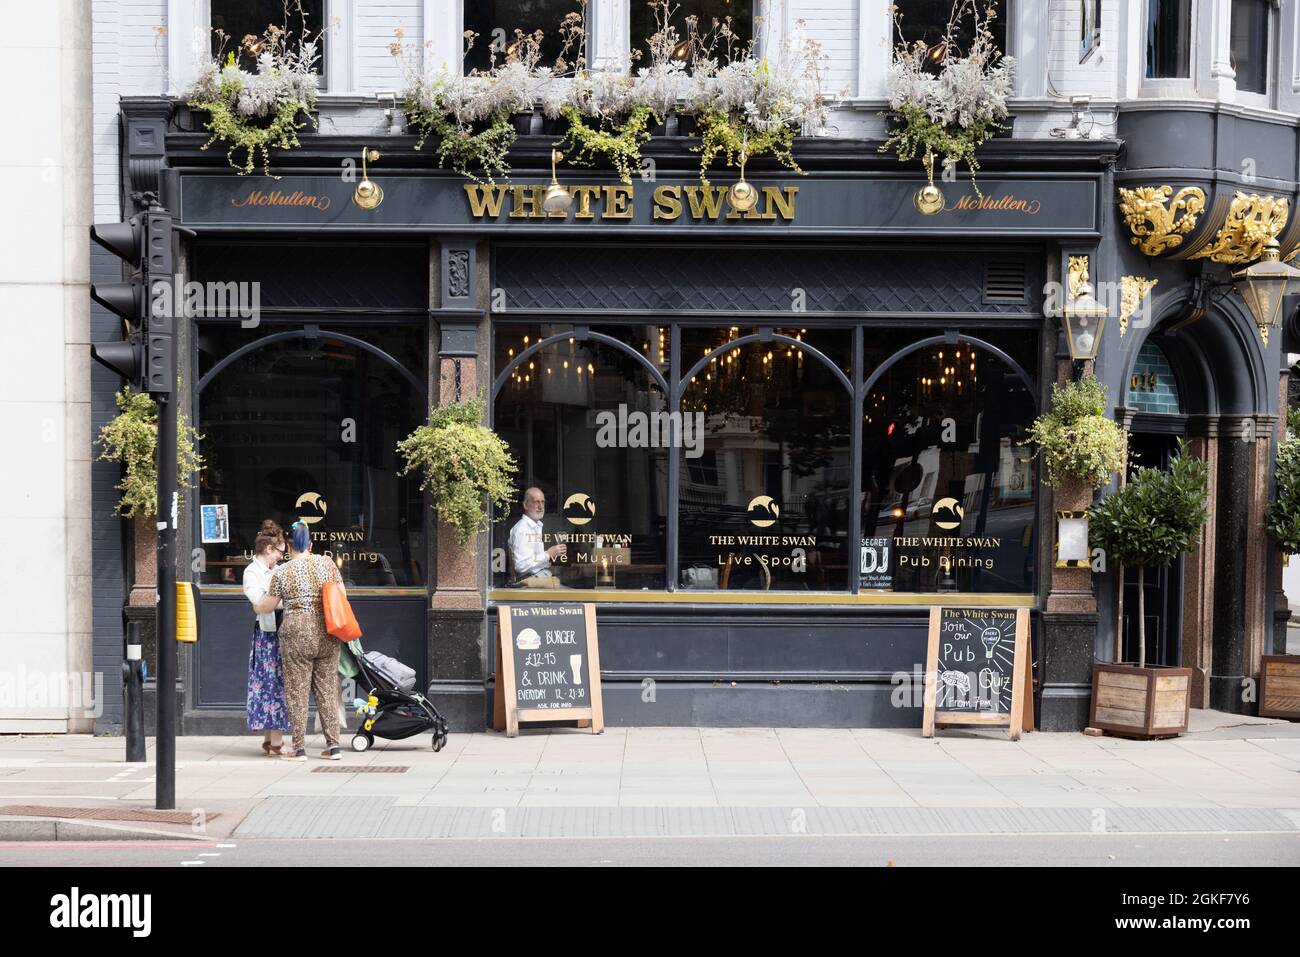 London pub exterior - The White Swan in Pimlico, on a sunny day in summer, Vauxhall Bridge Rd, Pimlico London UK Stock Photo